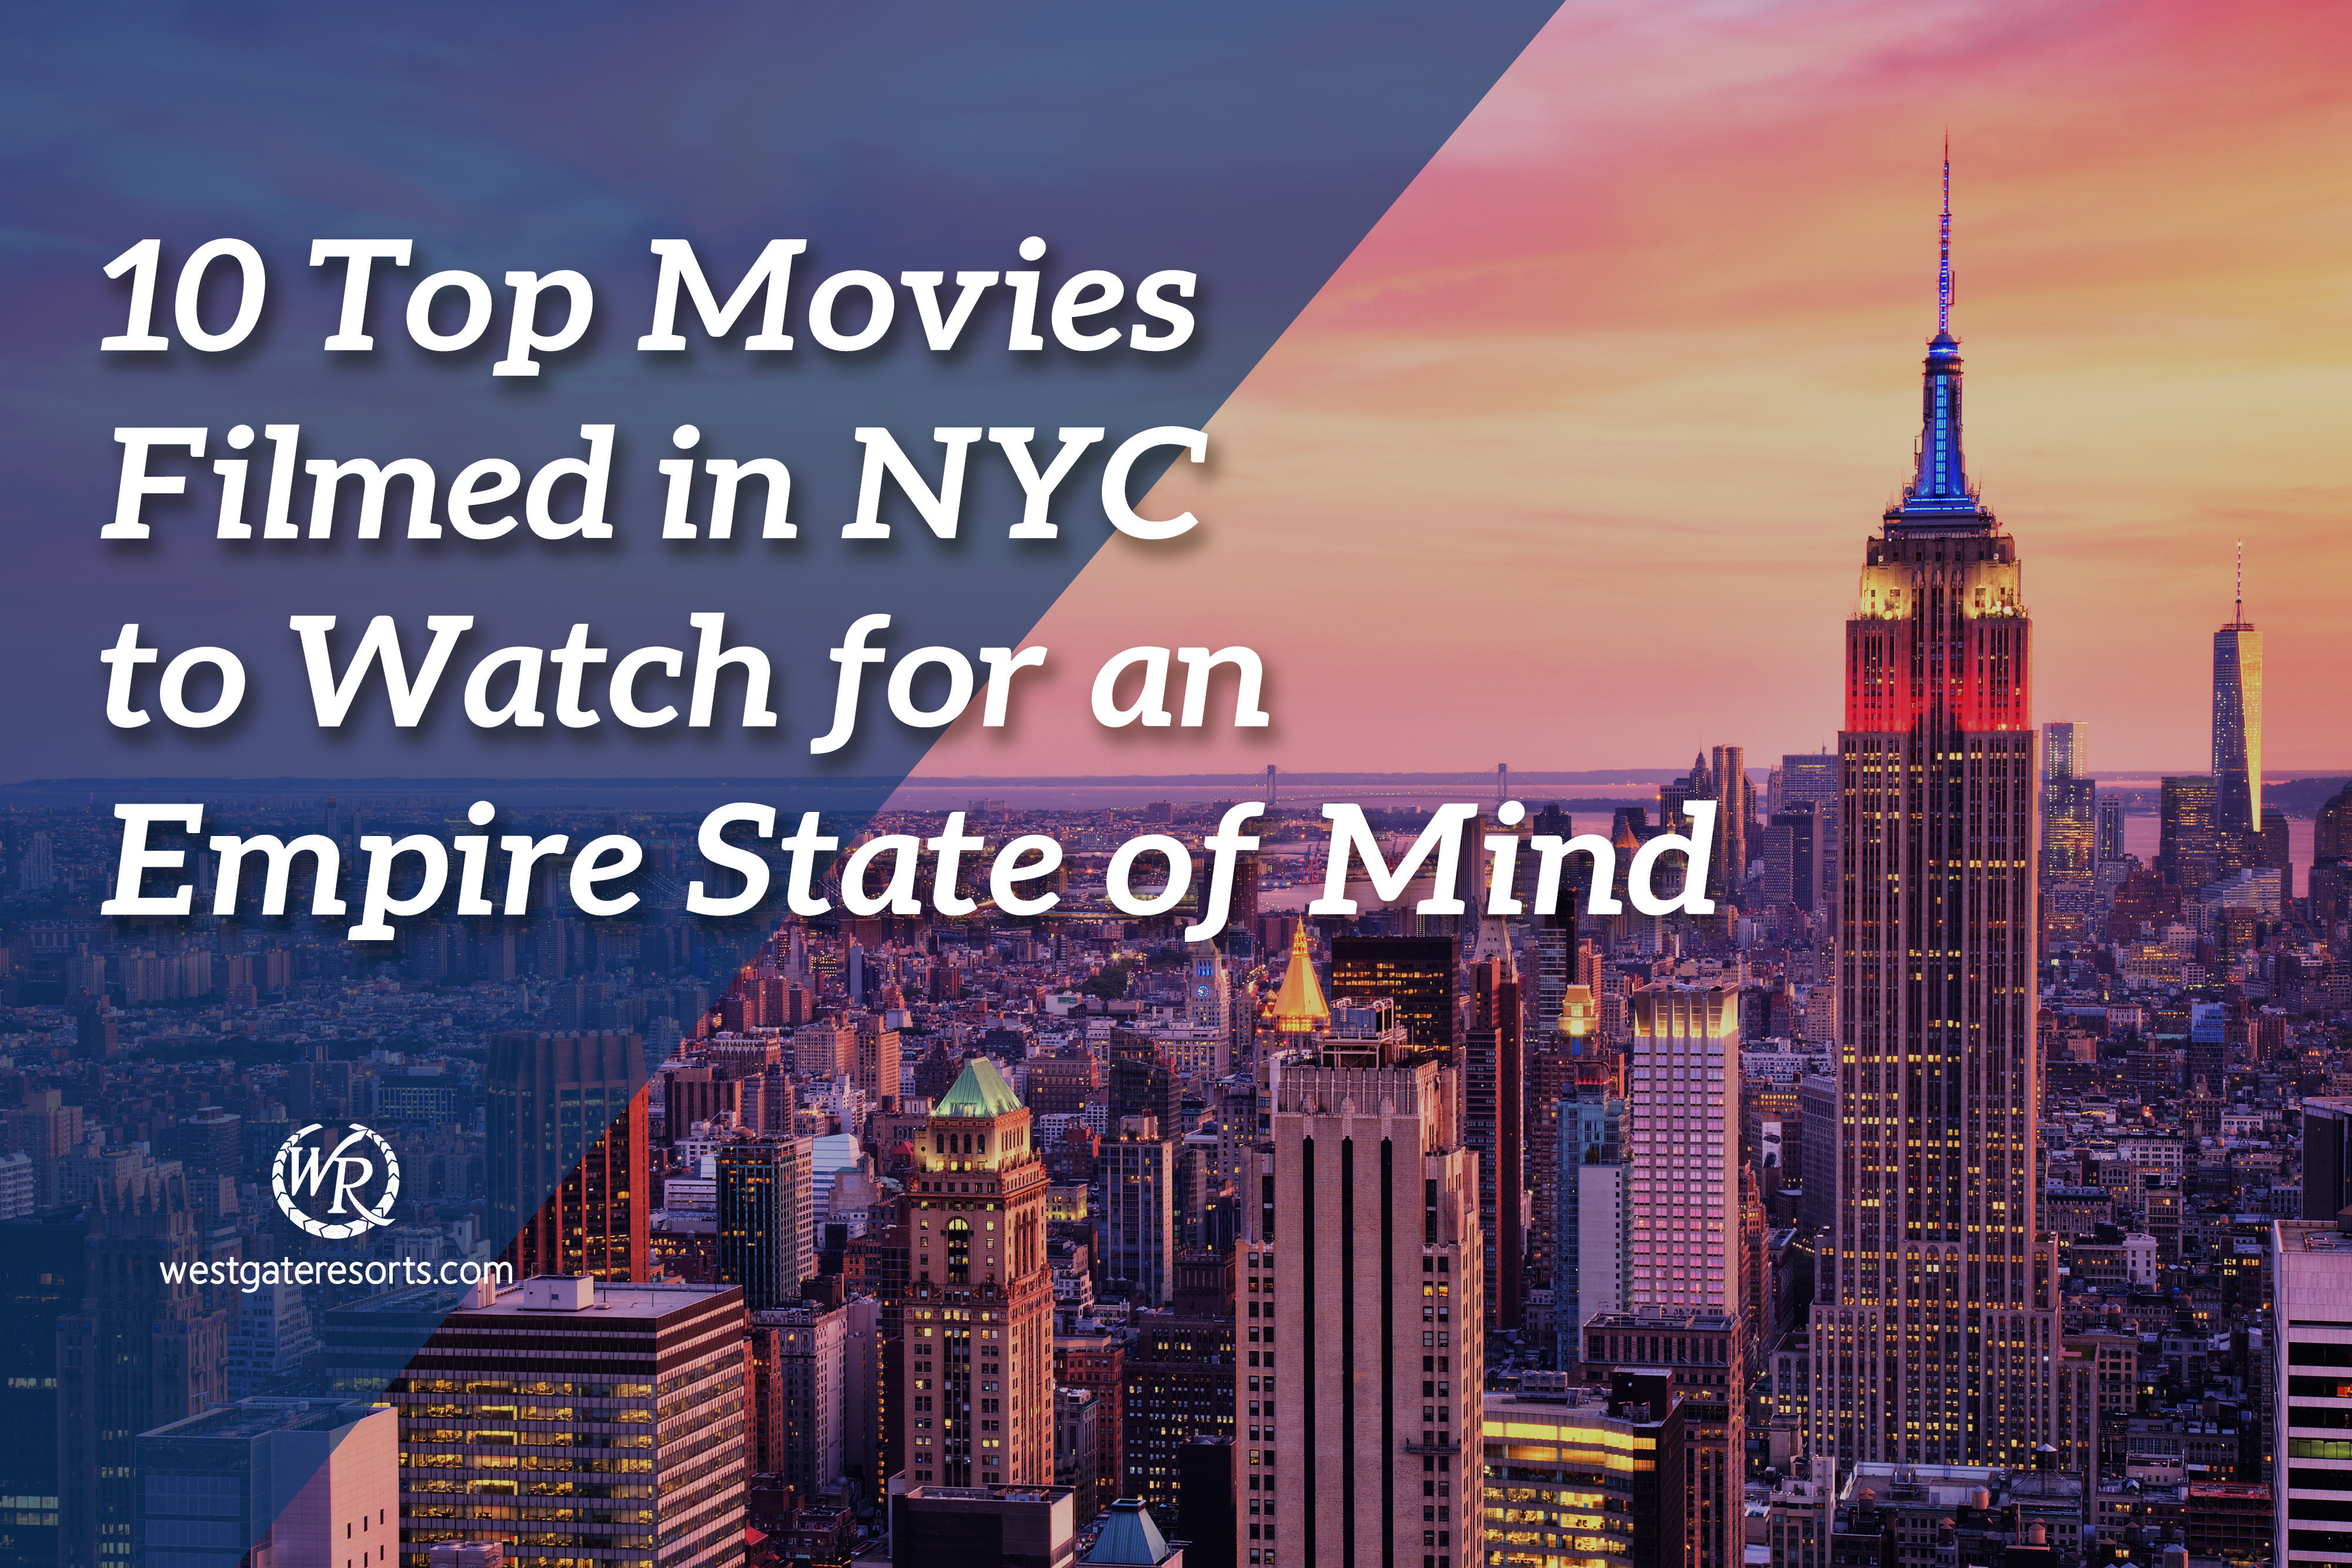 10 Top Movies Filmed in NYC to Watch for an Empire State of Mind